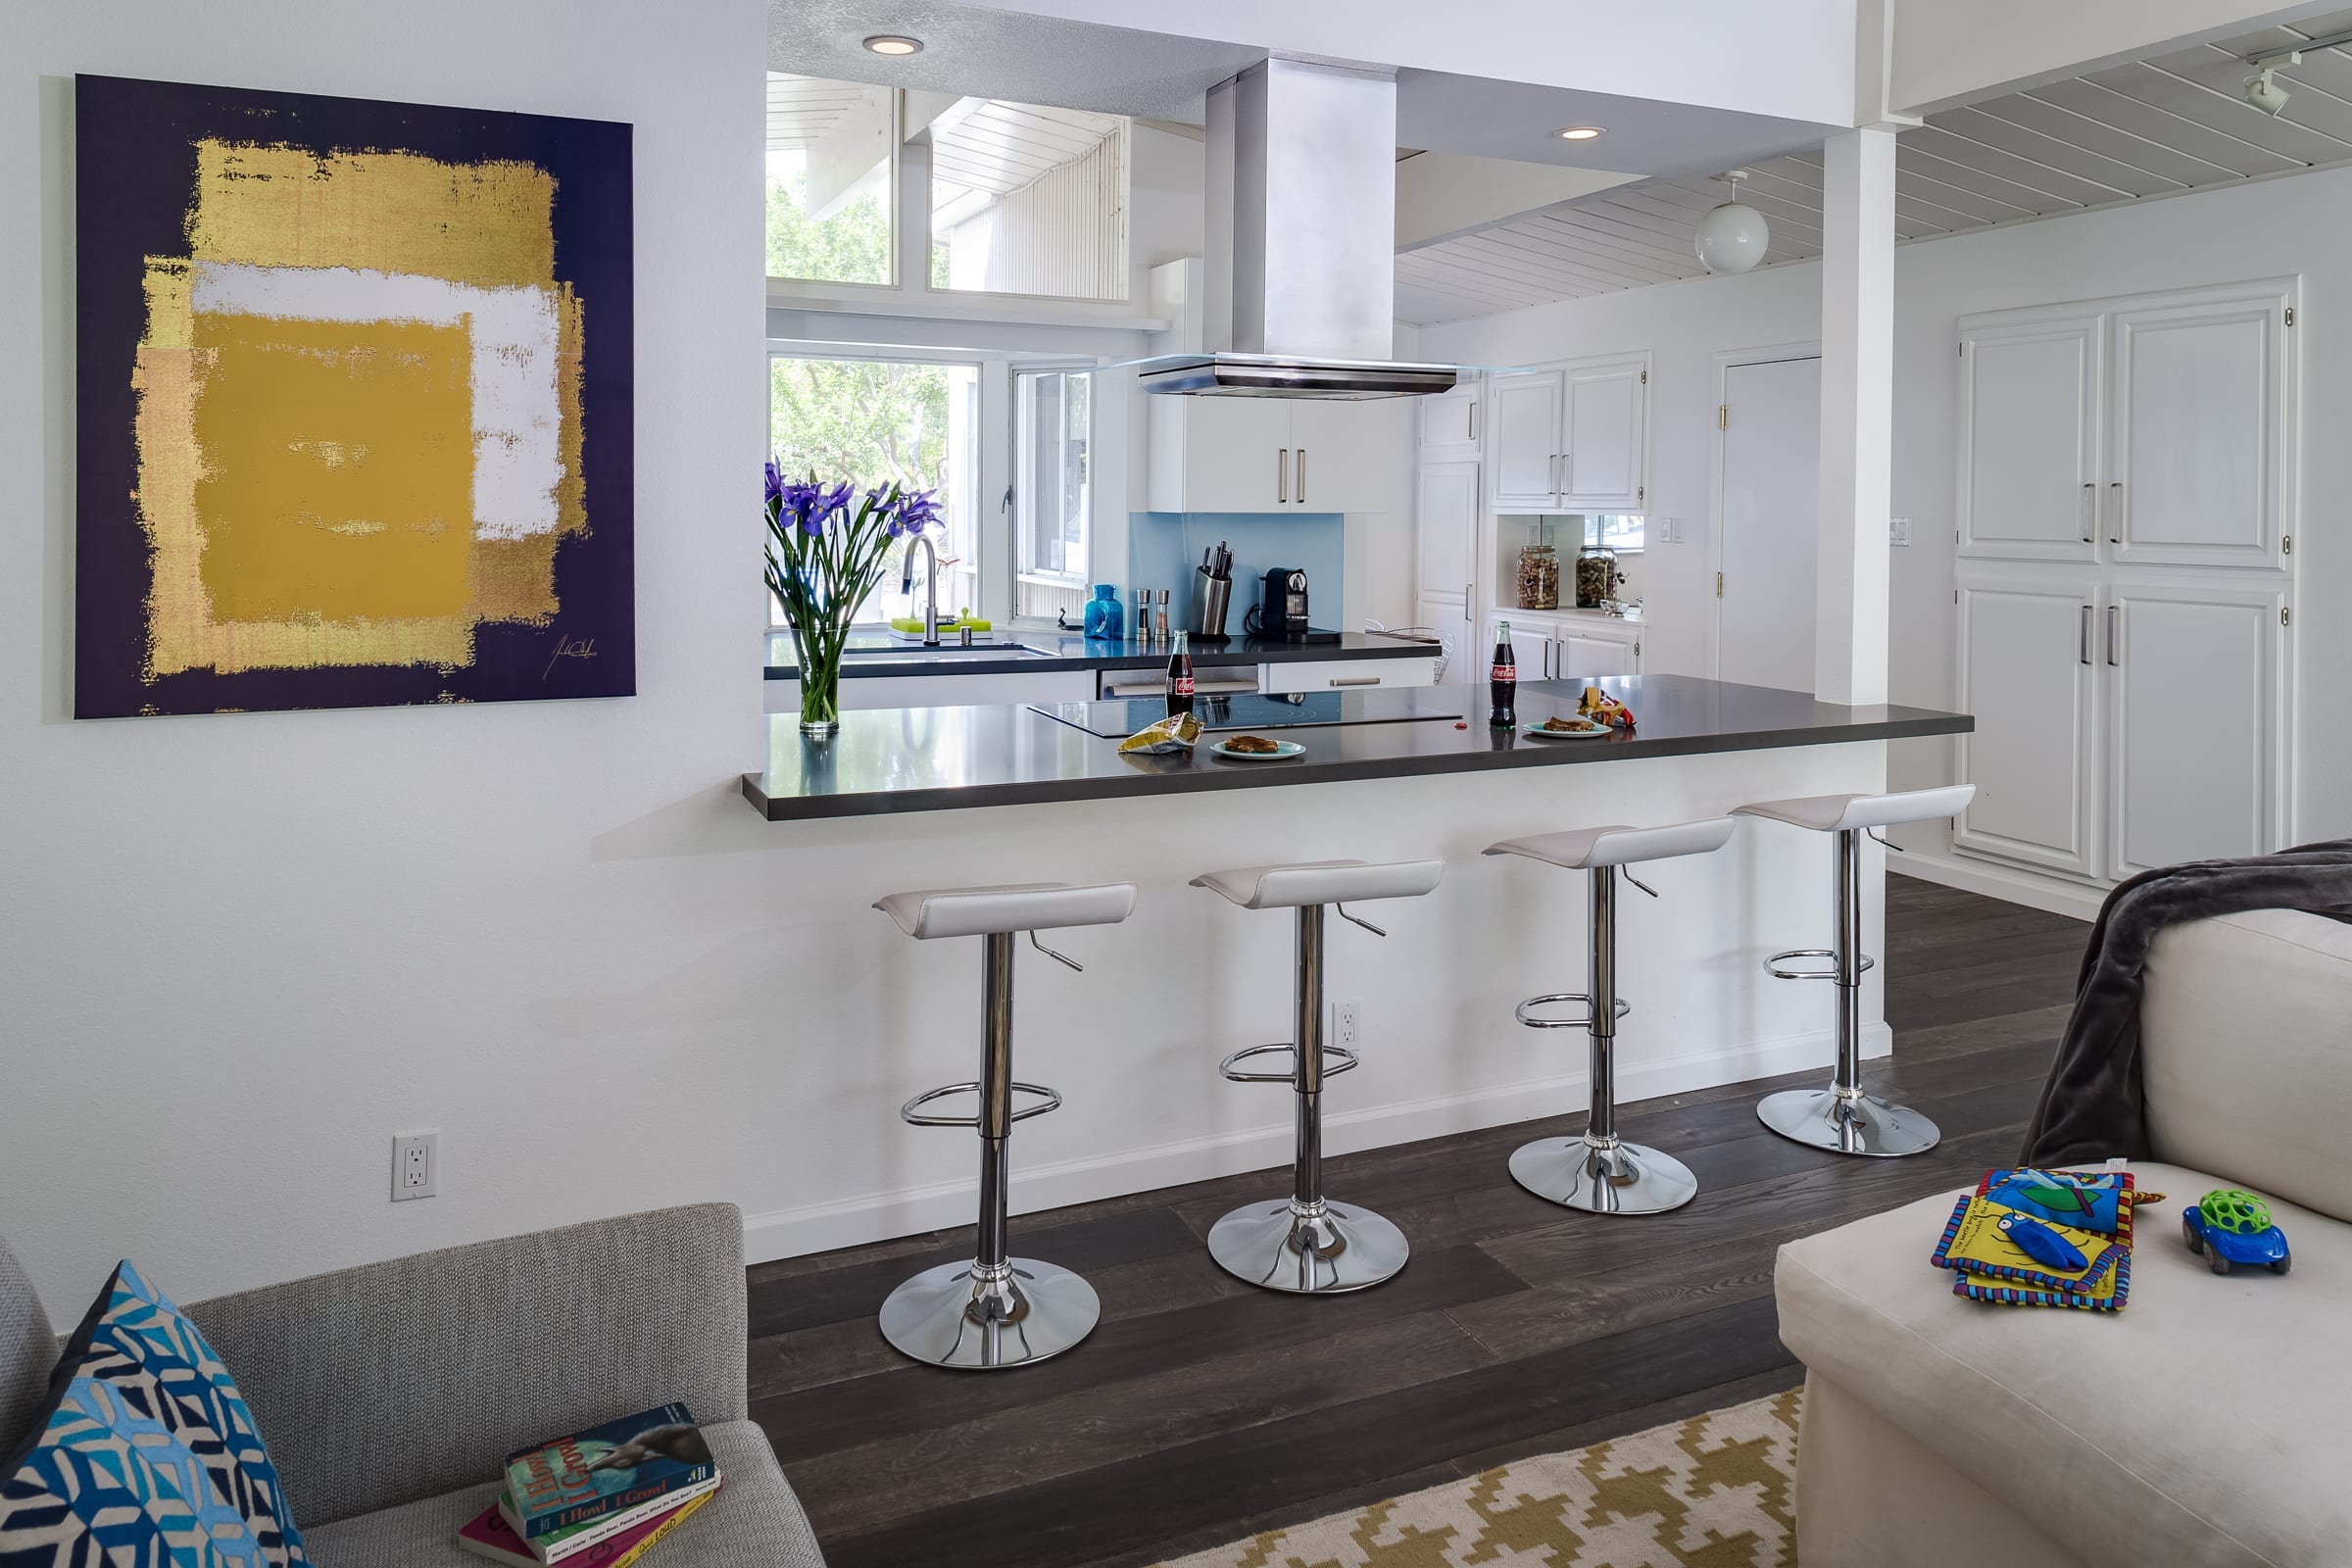 Eichler Kitchen Peninsula with Counter Seating black countertops and white stool seating for 4